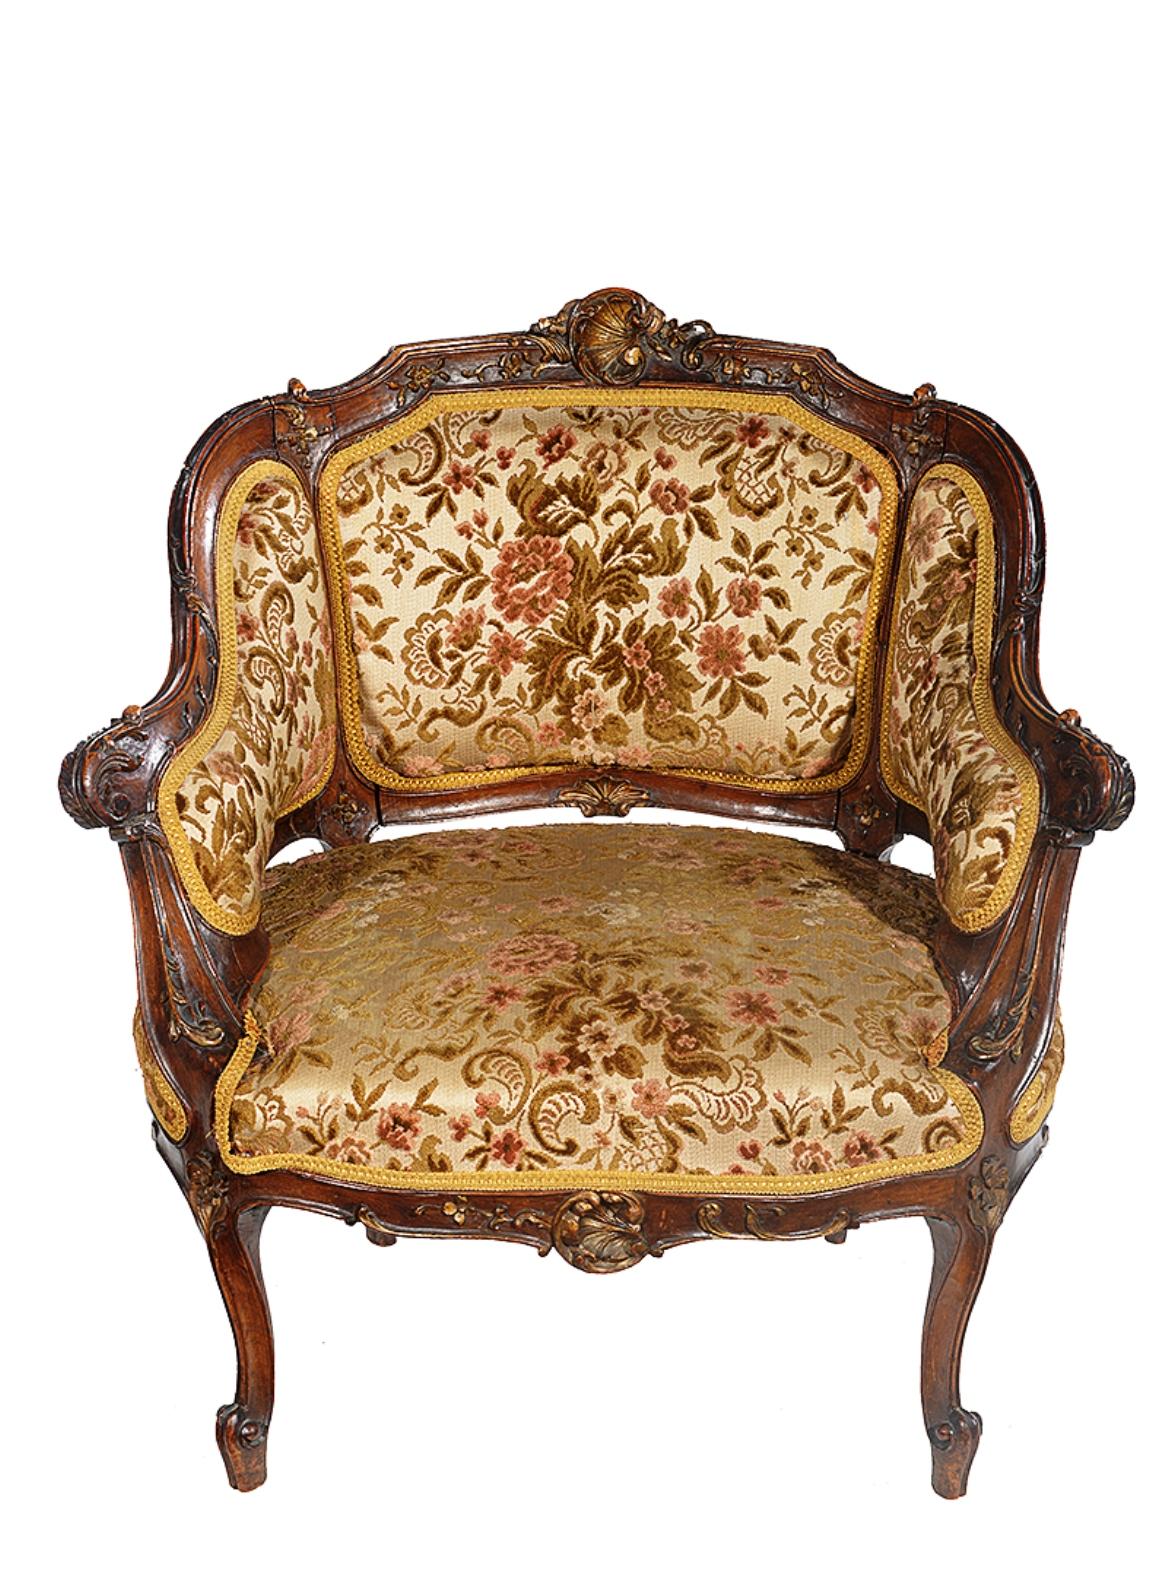 Late 19th Century French Louis XV Style Walnut Framed Petite Bergère Chair For Sale 3